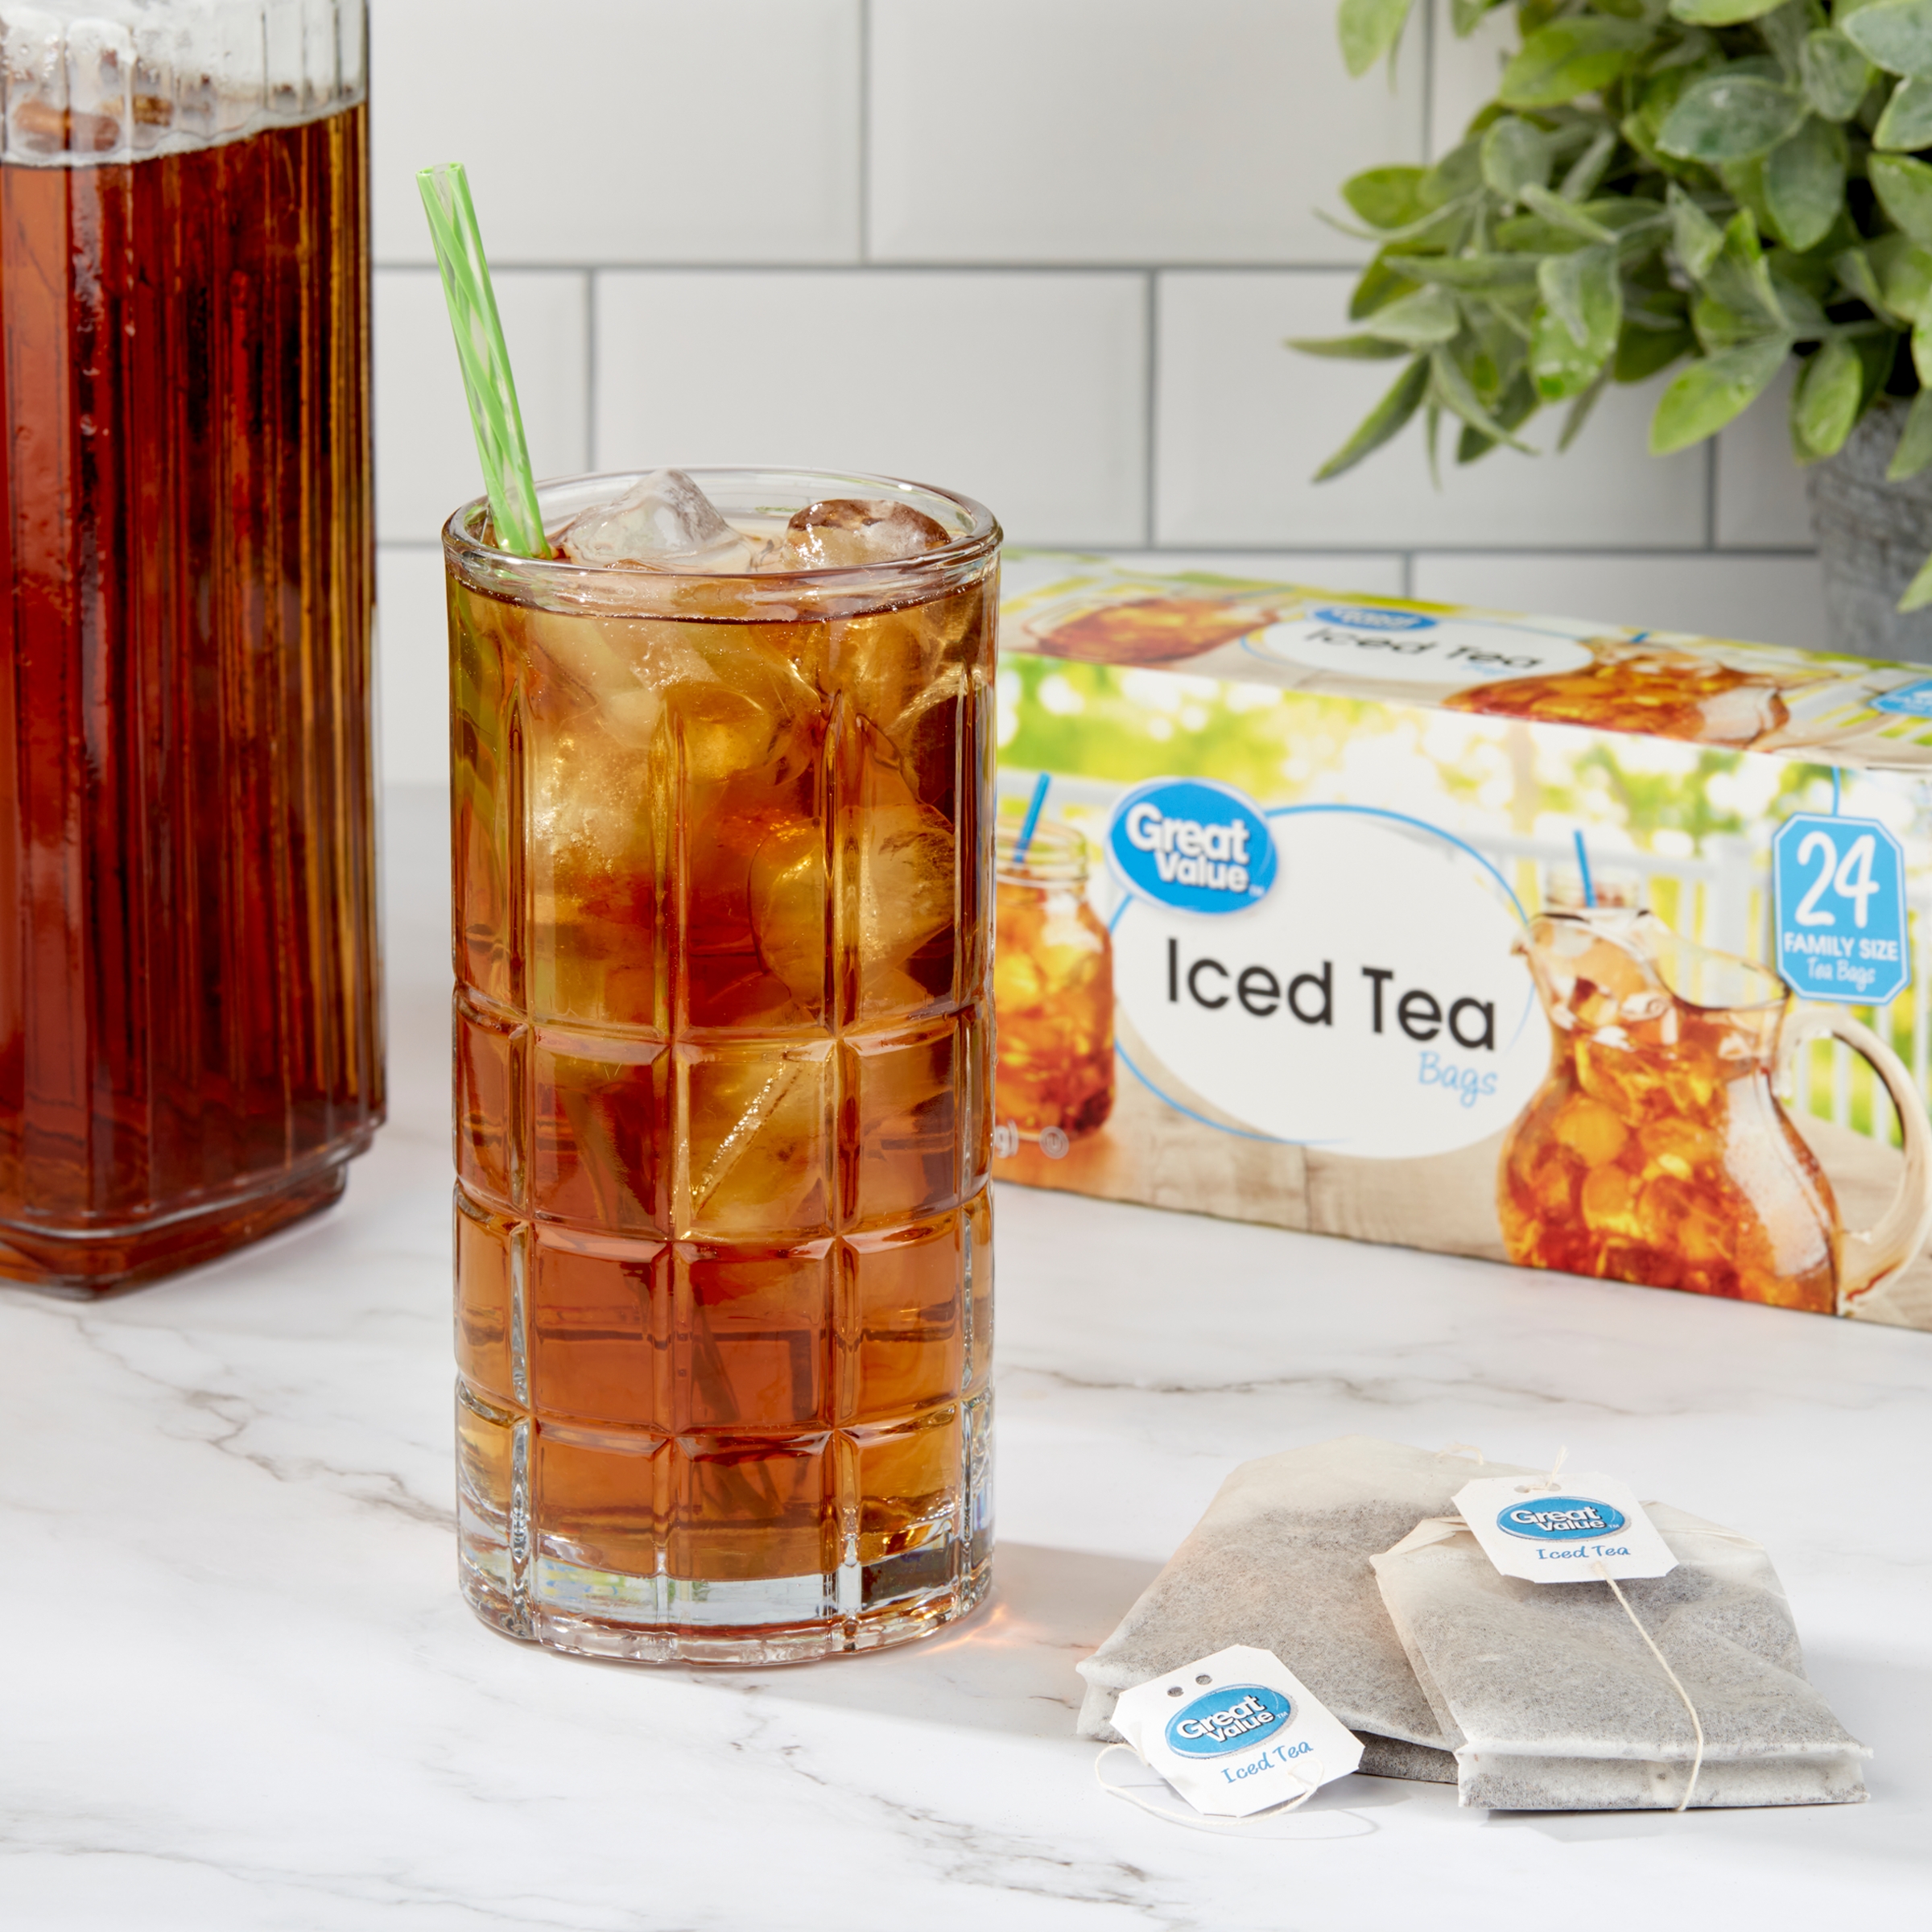 Great Value Iced Tea Bags Family Size, 24 Count, 6 oz - image 2 of 7